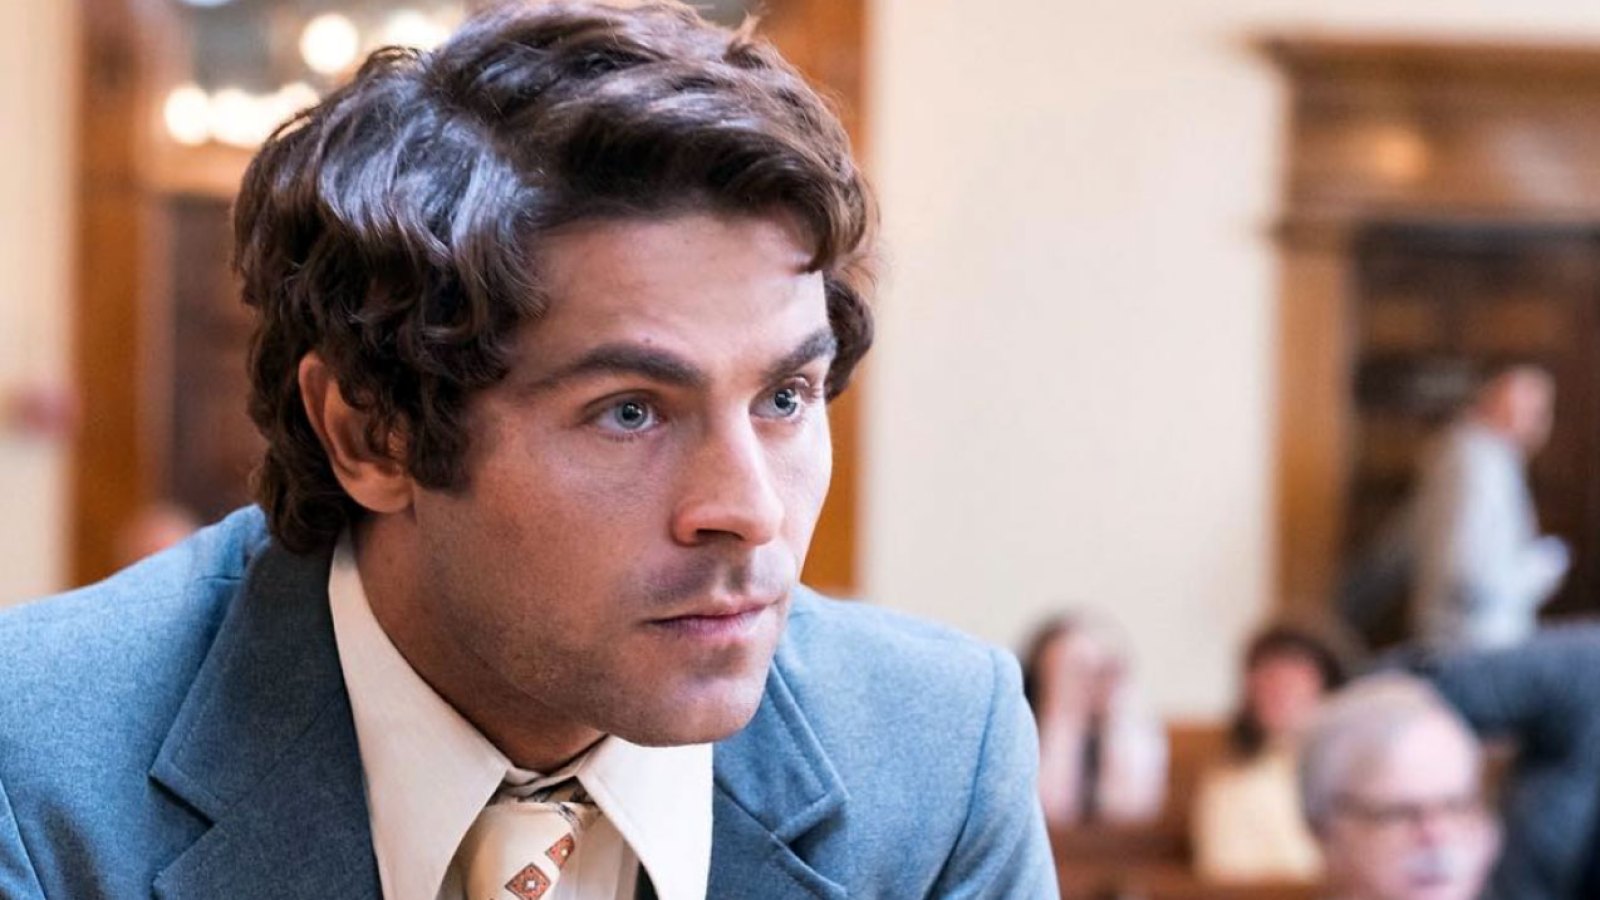 Zac Efron Reveals How He Channeled Serial Killer Ted Bundy in His New Film